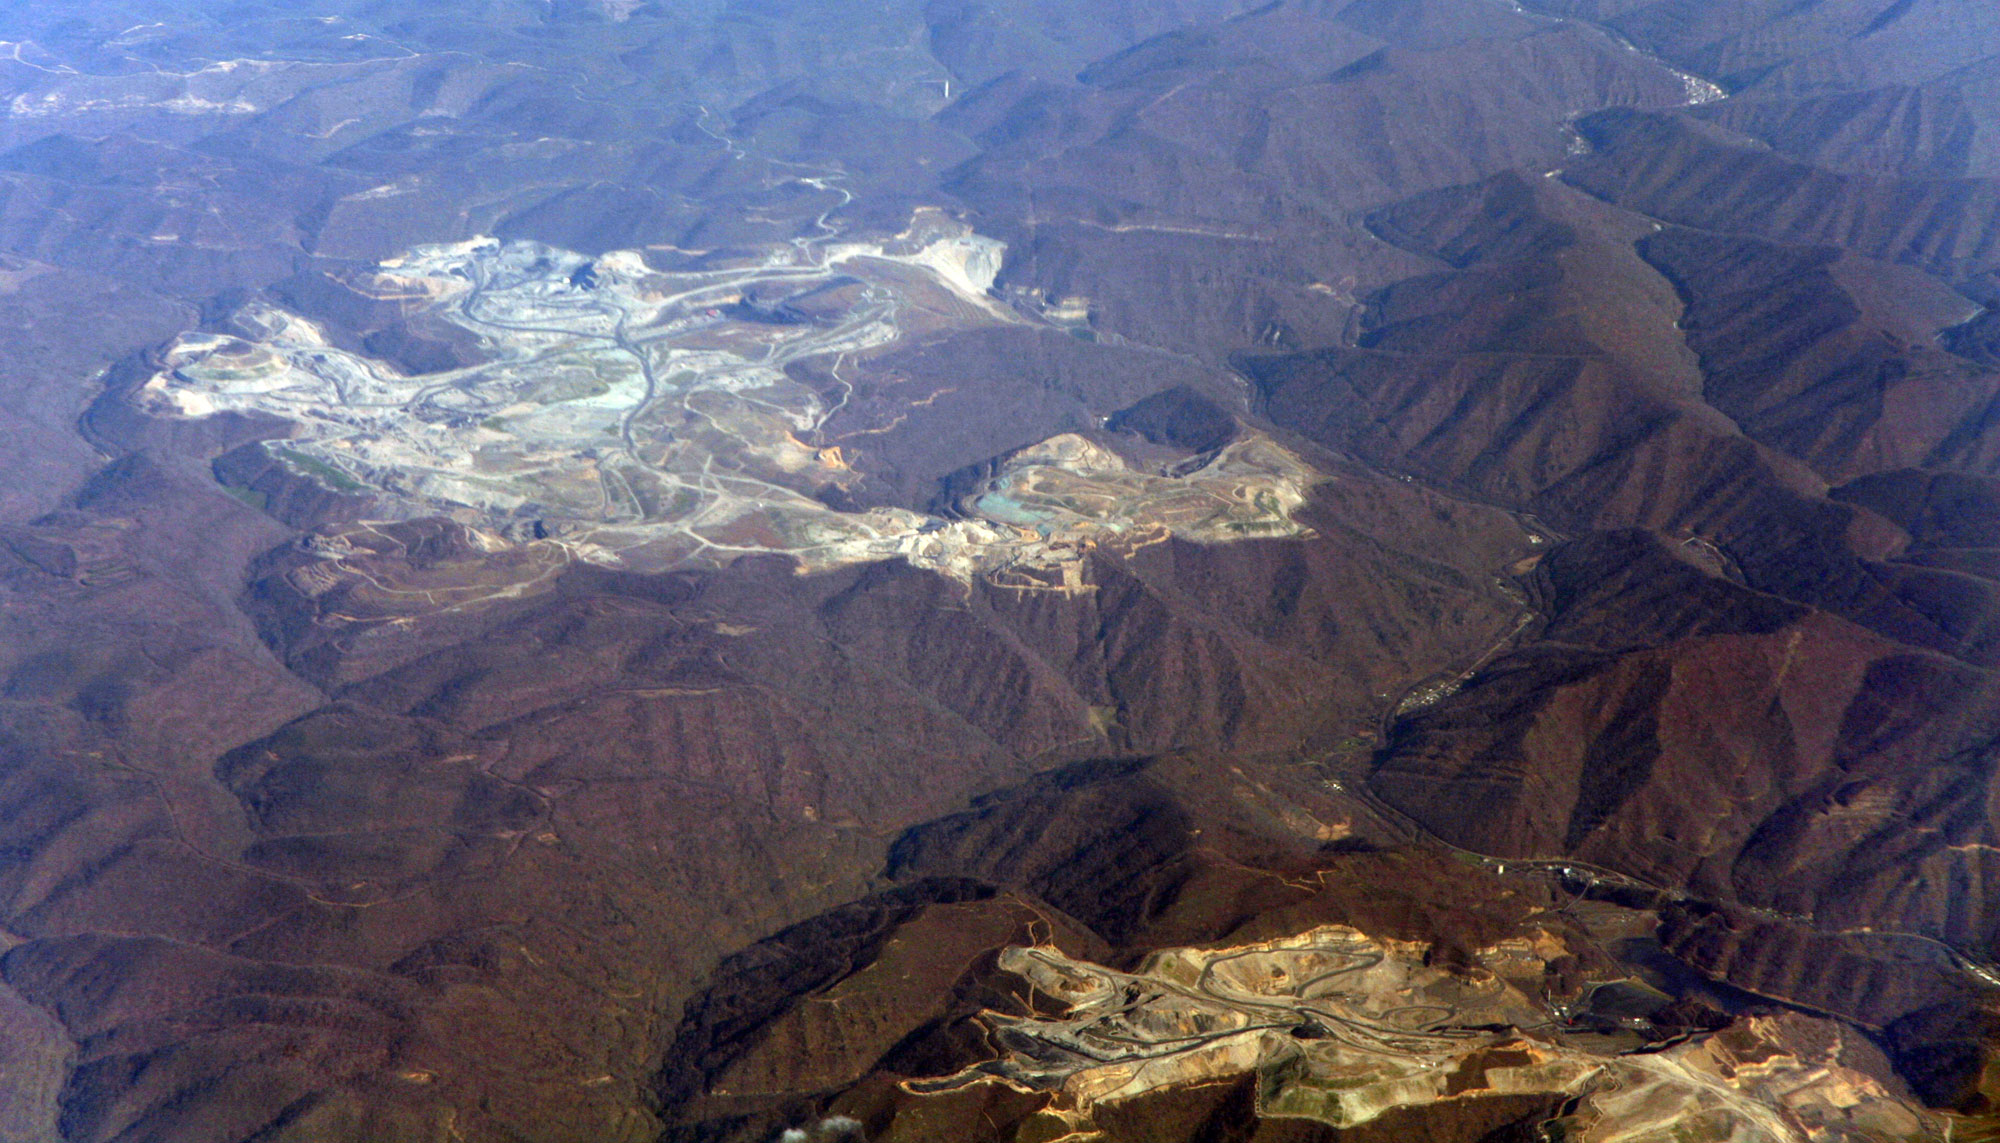 Aerial photograph of mountaintop removal mining taking place in Kentucky in 2012.